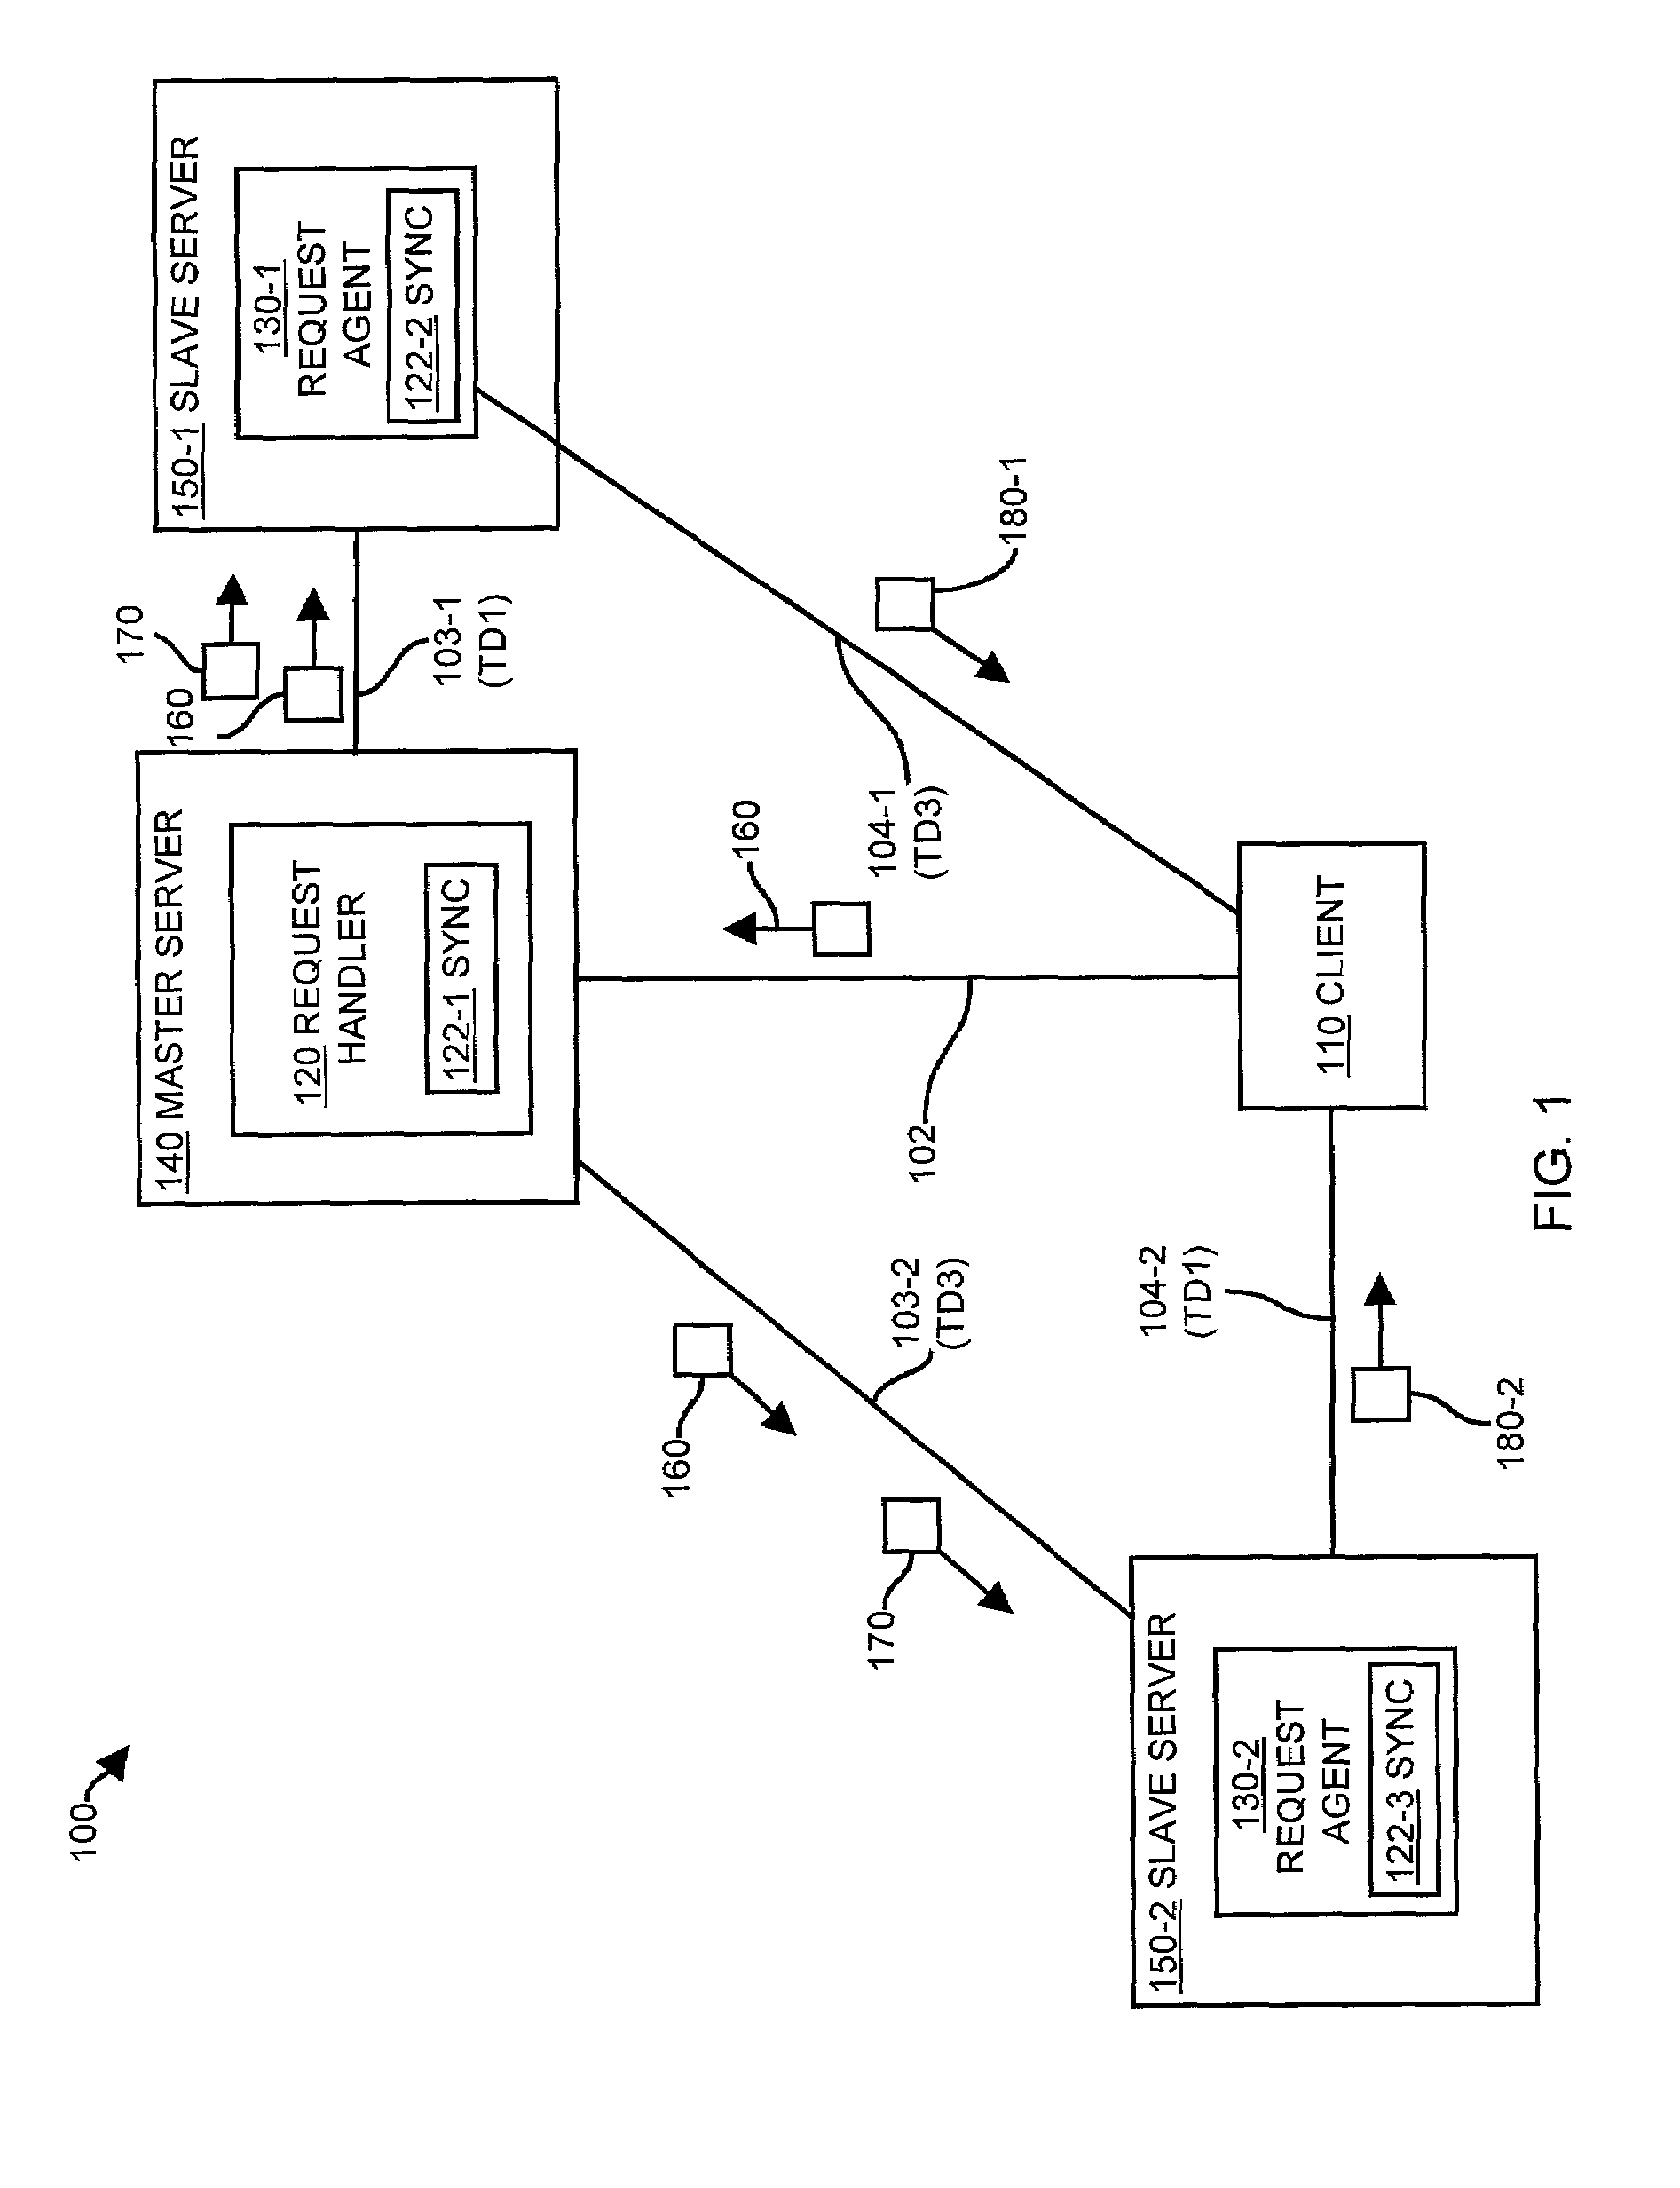 Method and apparatus for handling requests in a network